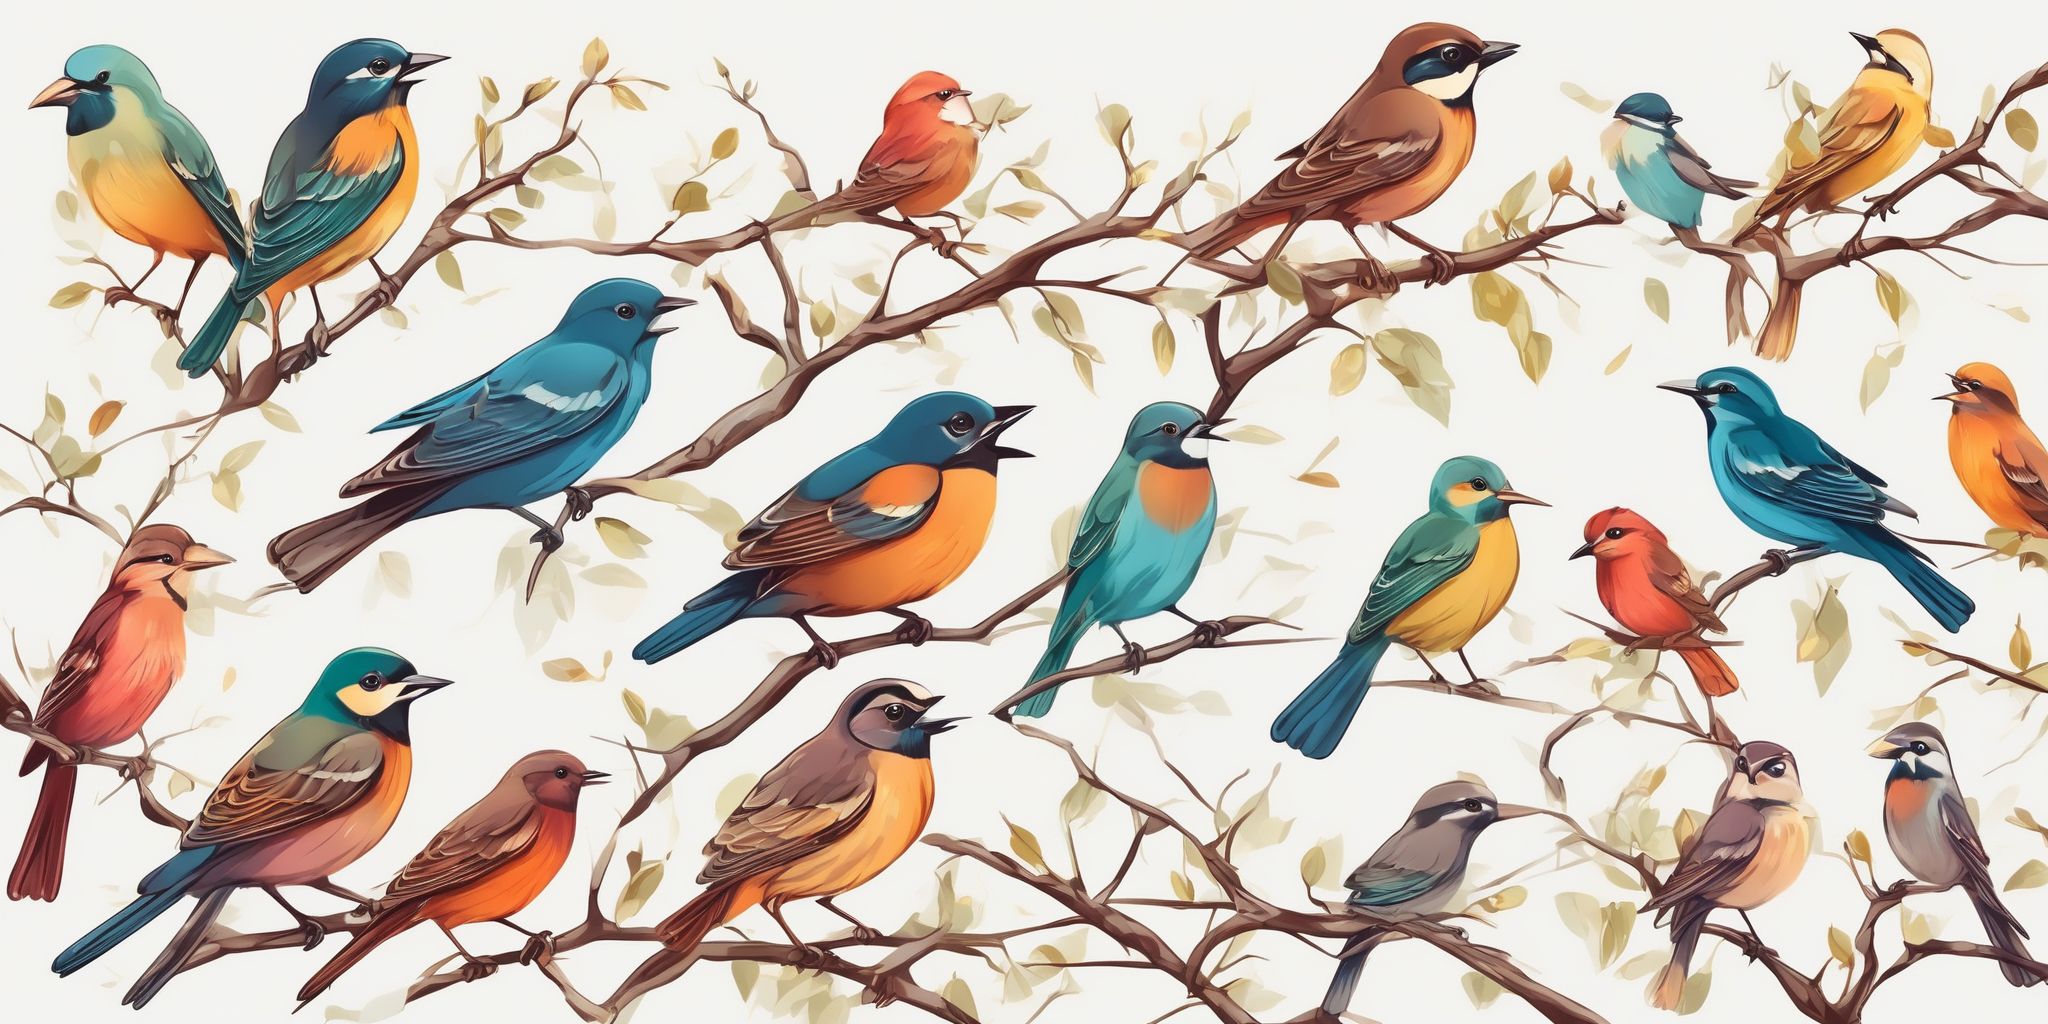 Chirping birds in illustration style with gradients and white background